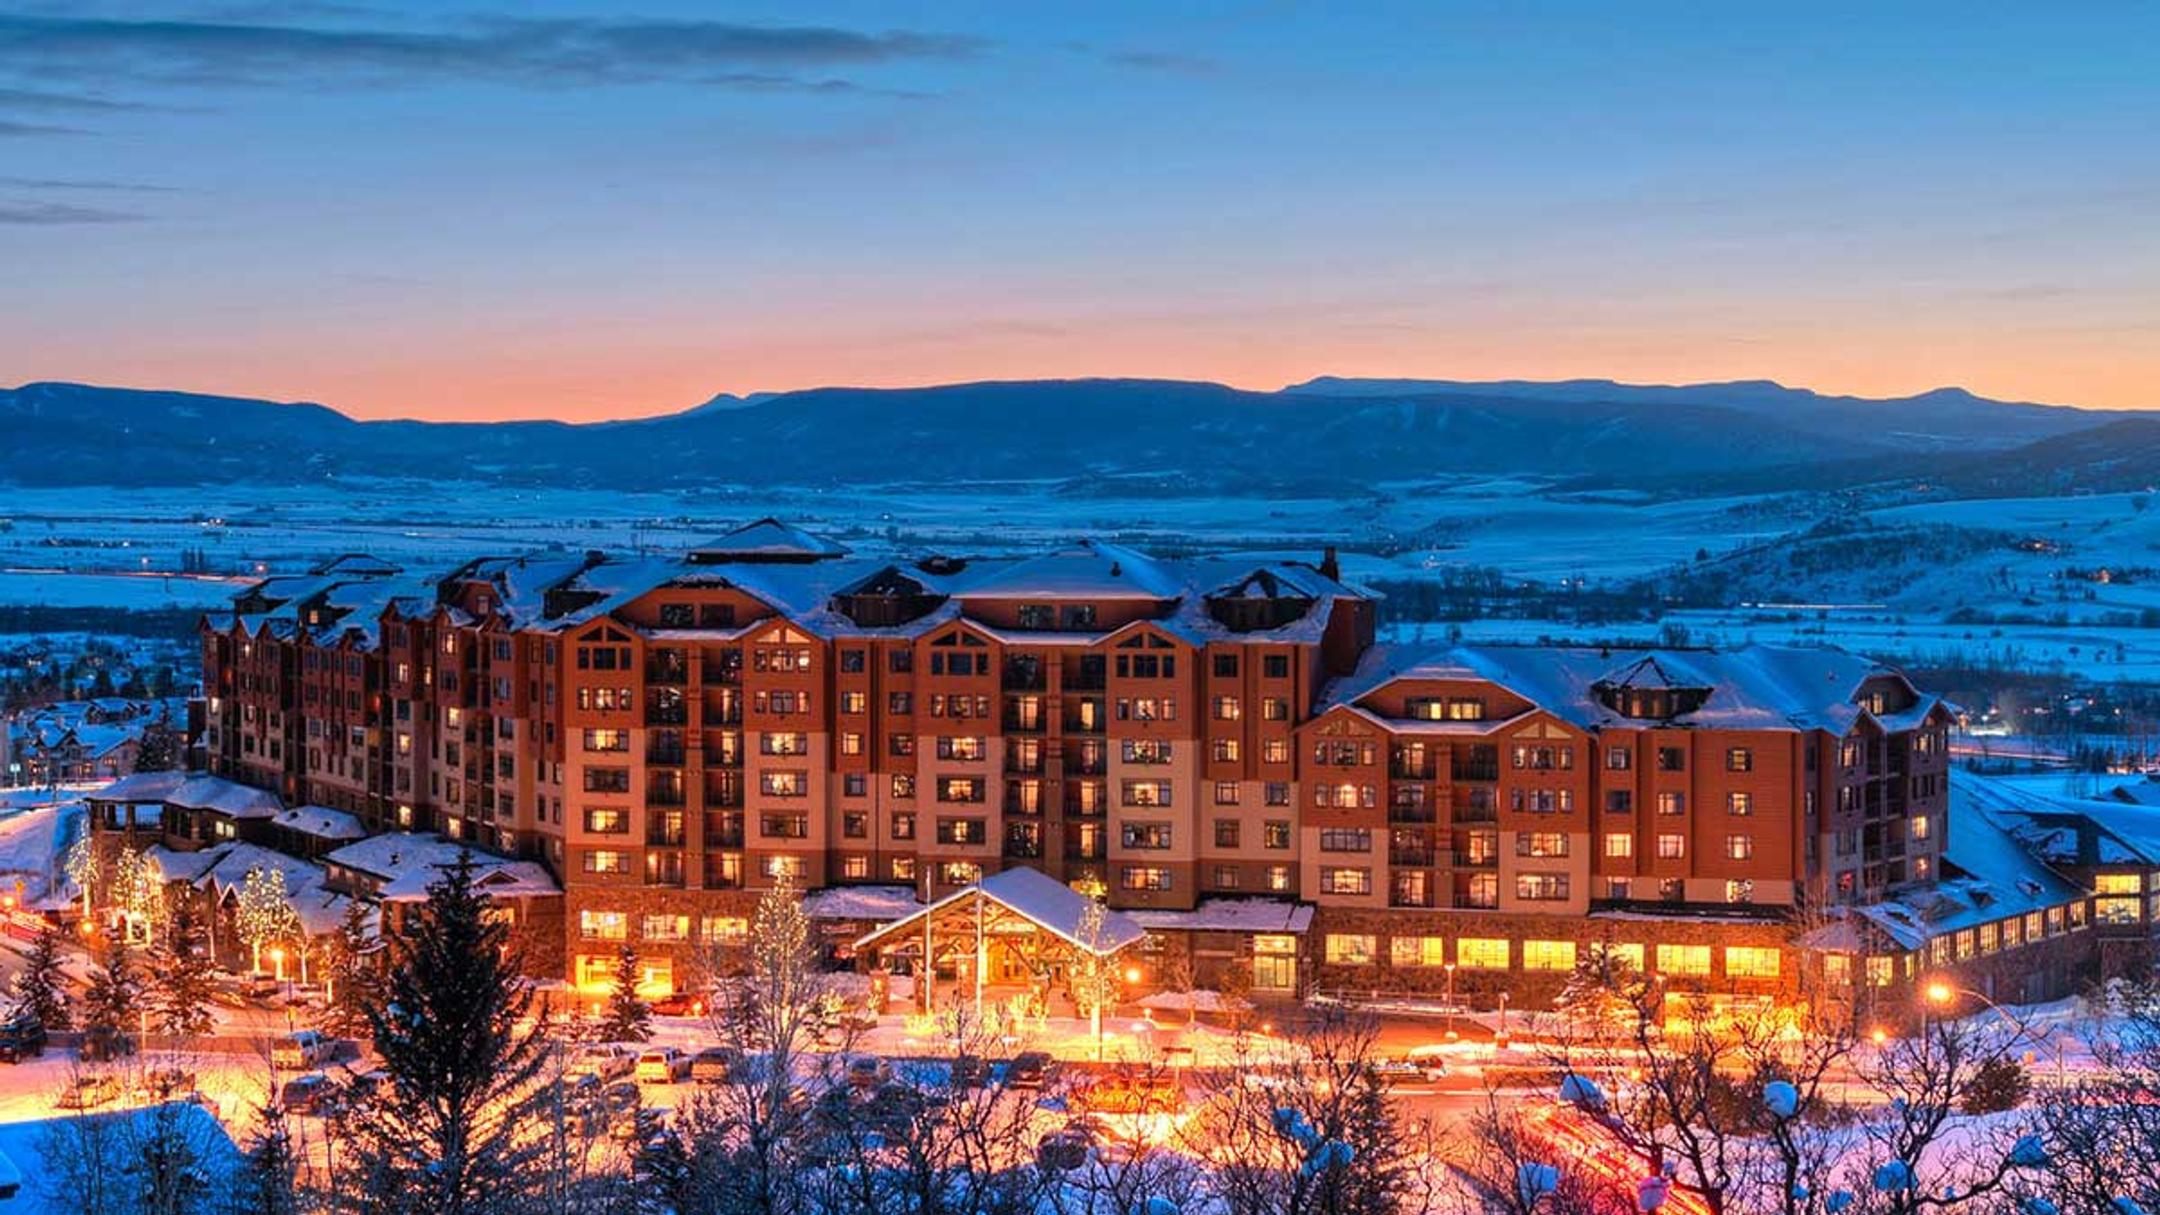 The Steamboat Grand, Steamboat Springs